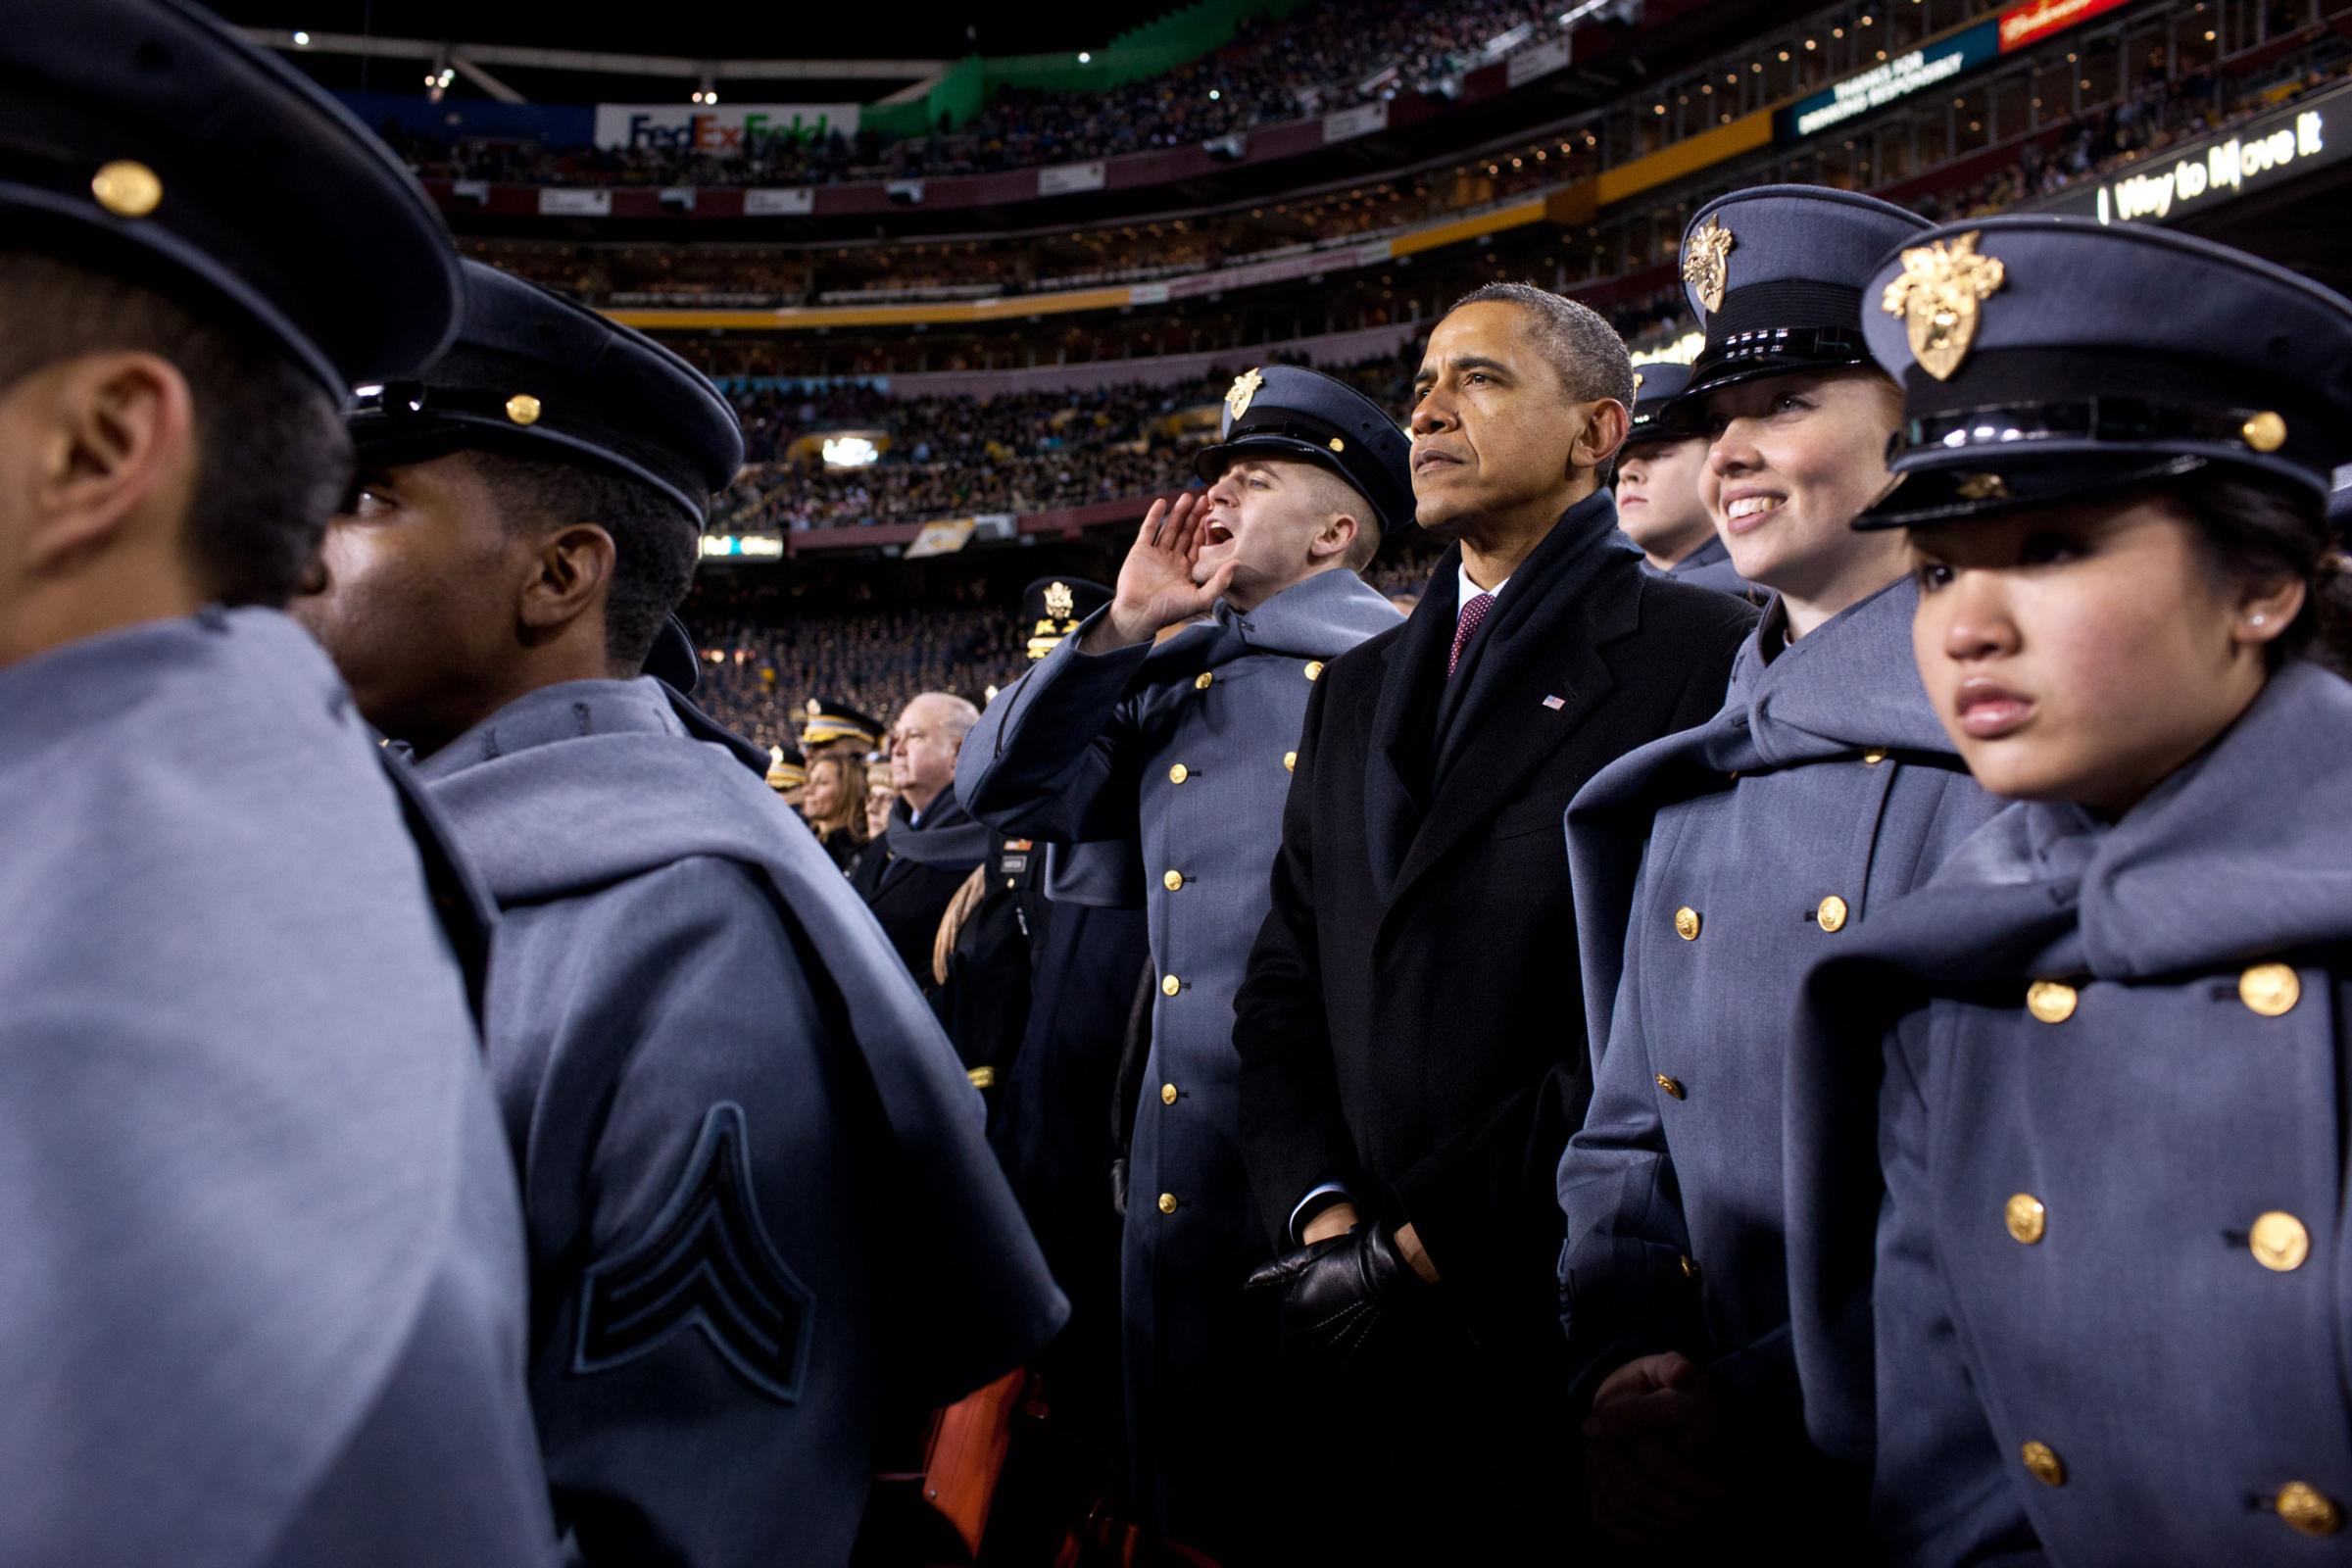 "Attending the annual Army vs. Navy football game at FedEx Field outside Washington, the President spent part of the first half watching the game with Midshipmen from the Naval Academy. During the second half, he crossed the field and watched with Cadets from the U.S. Military Academy (pictured here), Dec. 10, 2011.